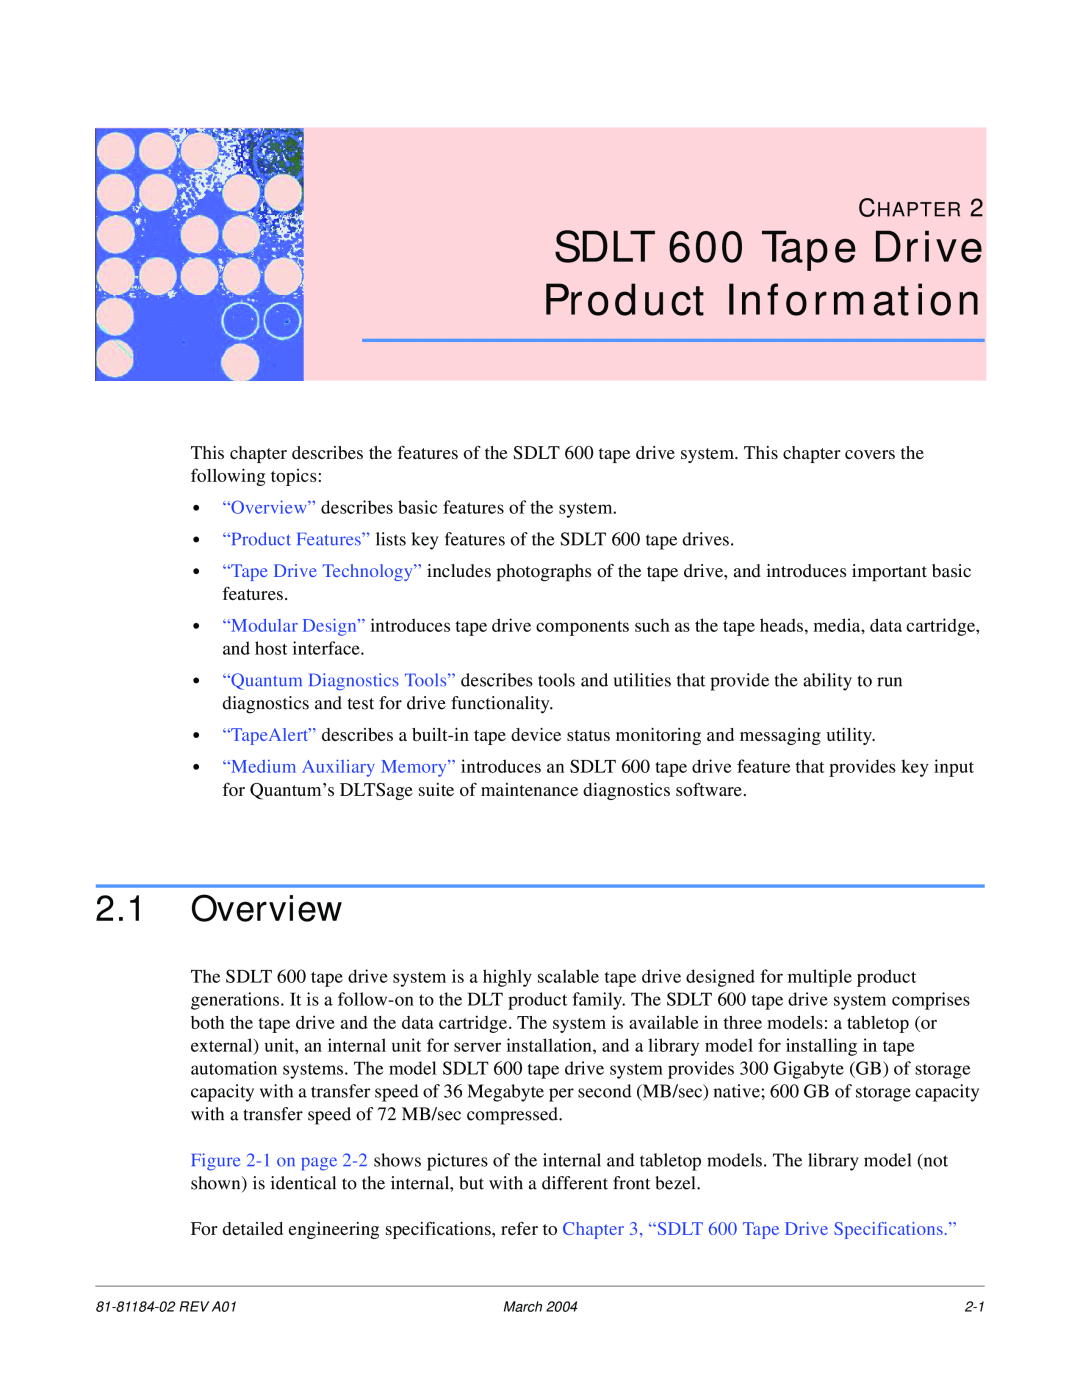 Tandberg Data manual SDLT 600 Tape Drive Product Information, Overview, Chapter 